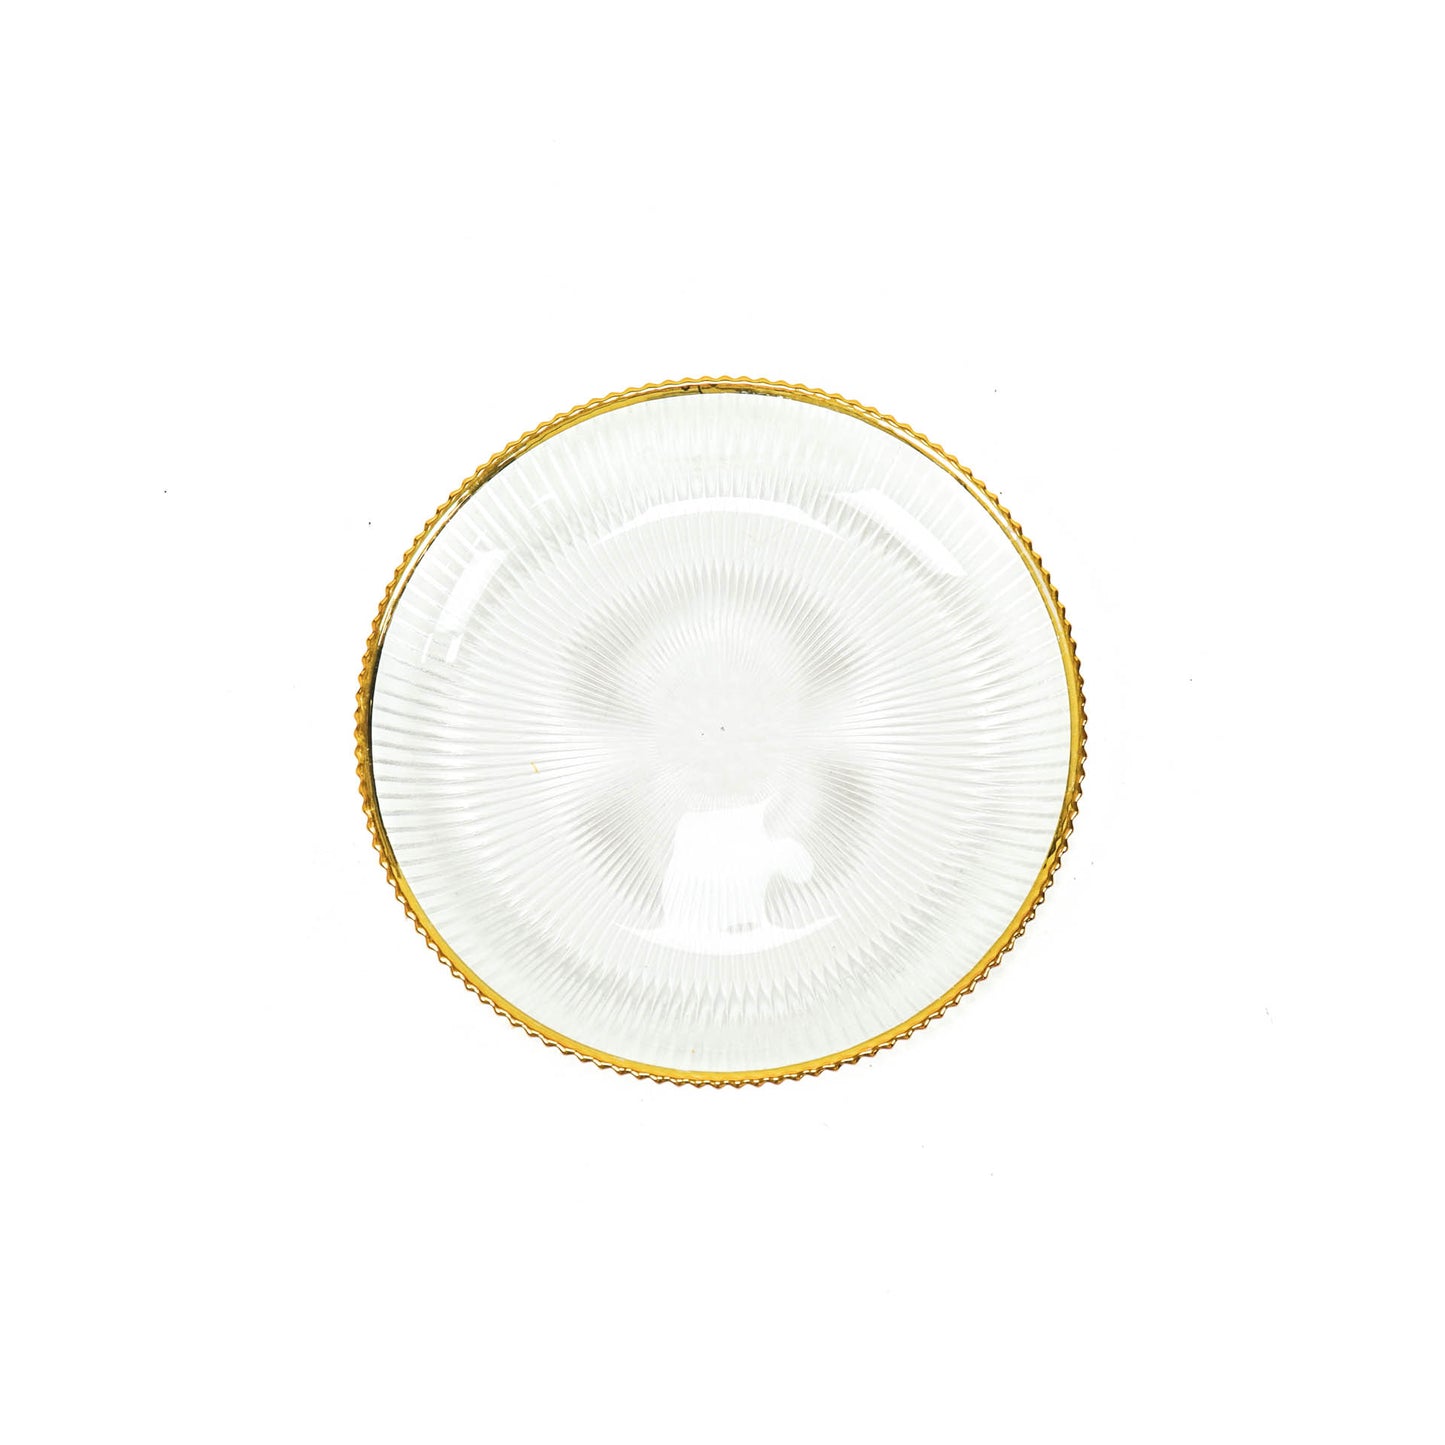 HV Dinerplate of glass with golden rim - 31x3.5cm